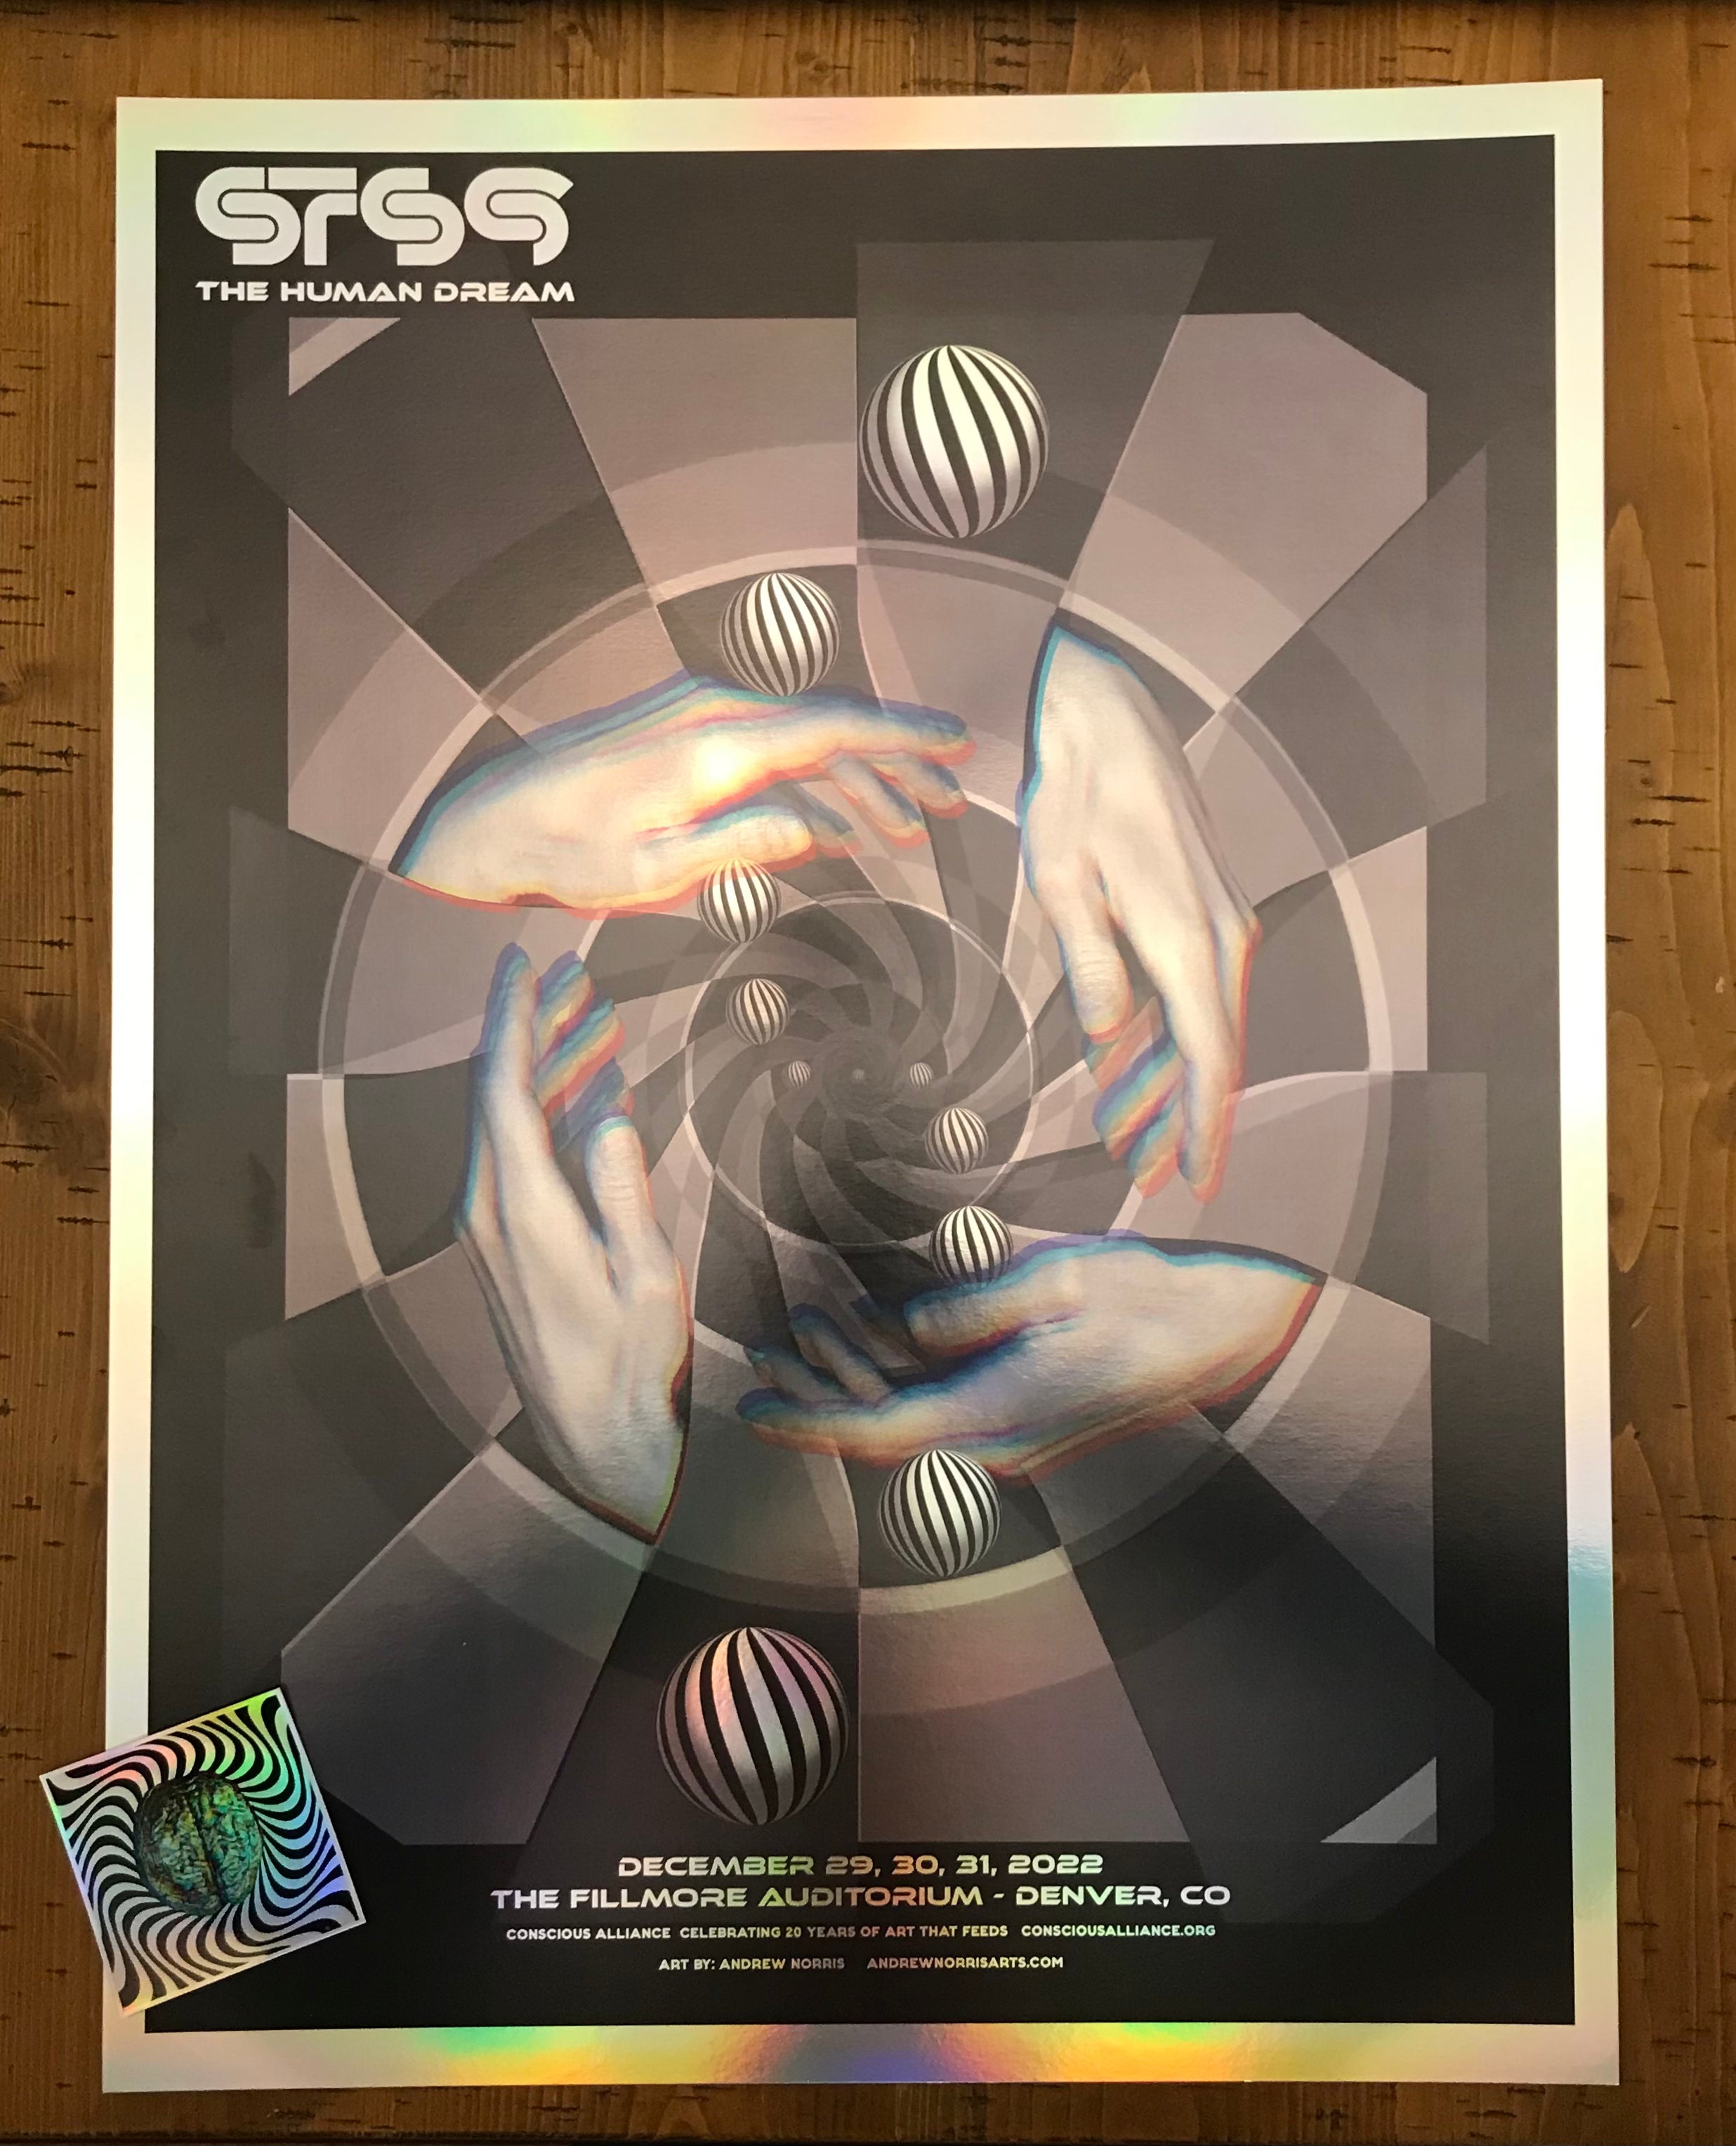 STS9 NYE 2022 Limited Edition Show Poster with ConsciousAlliance